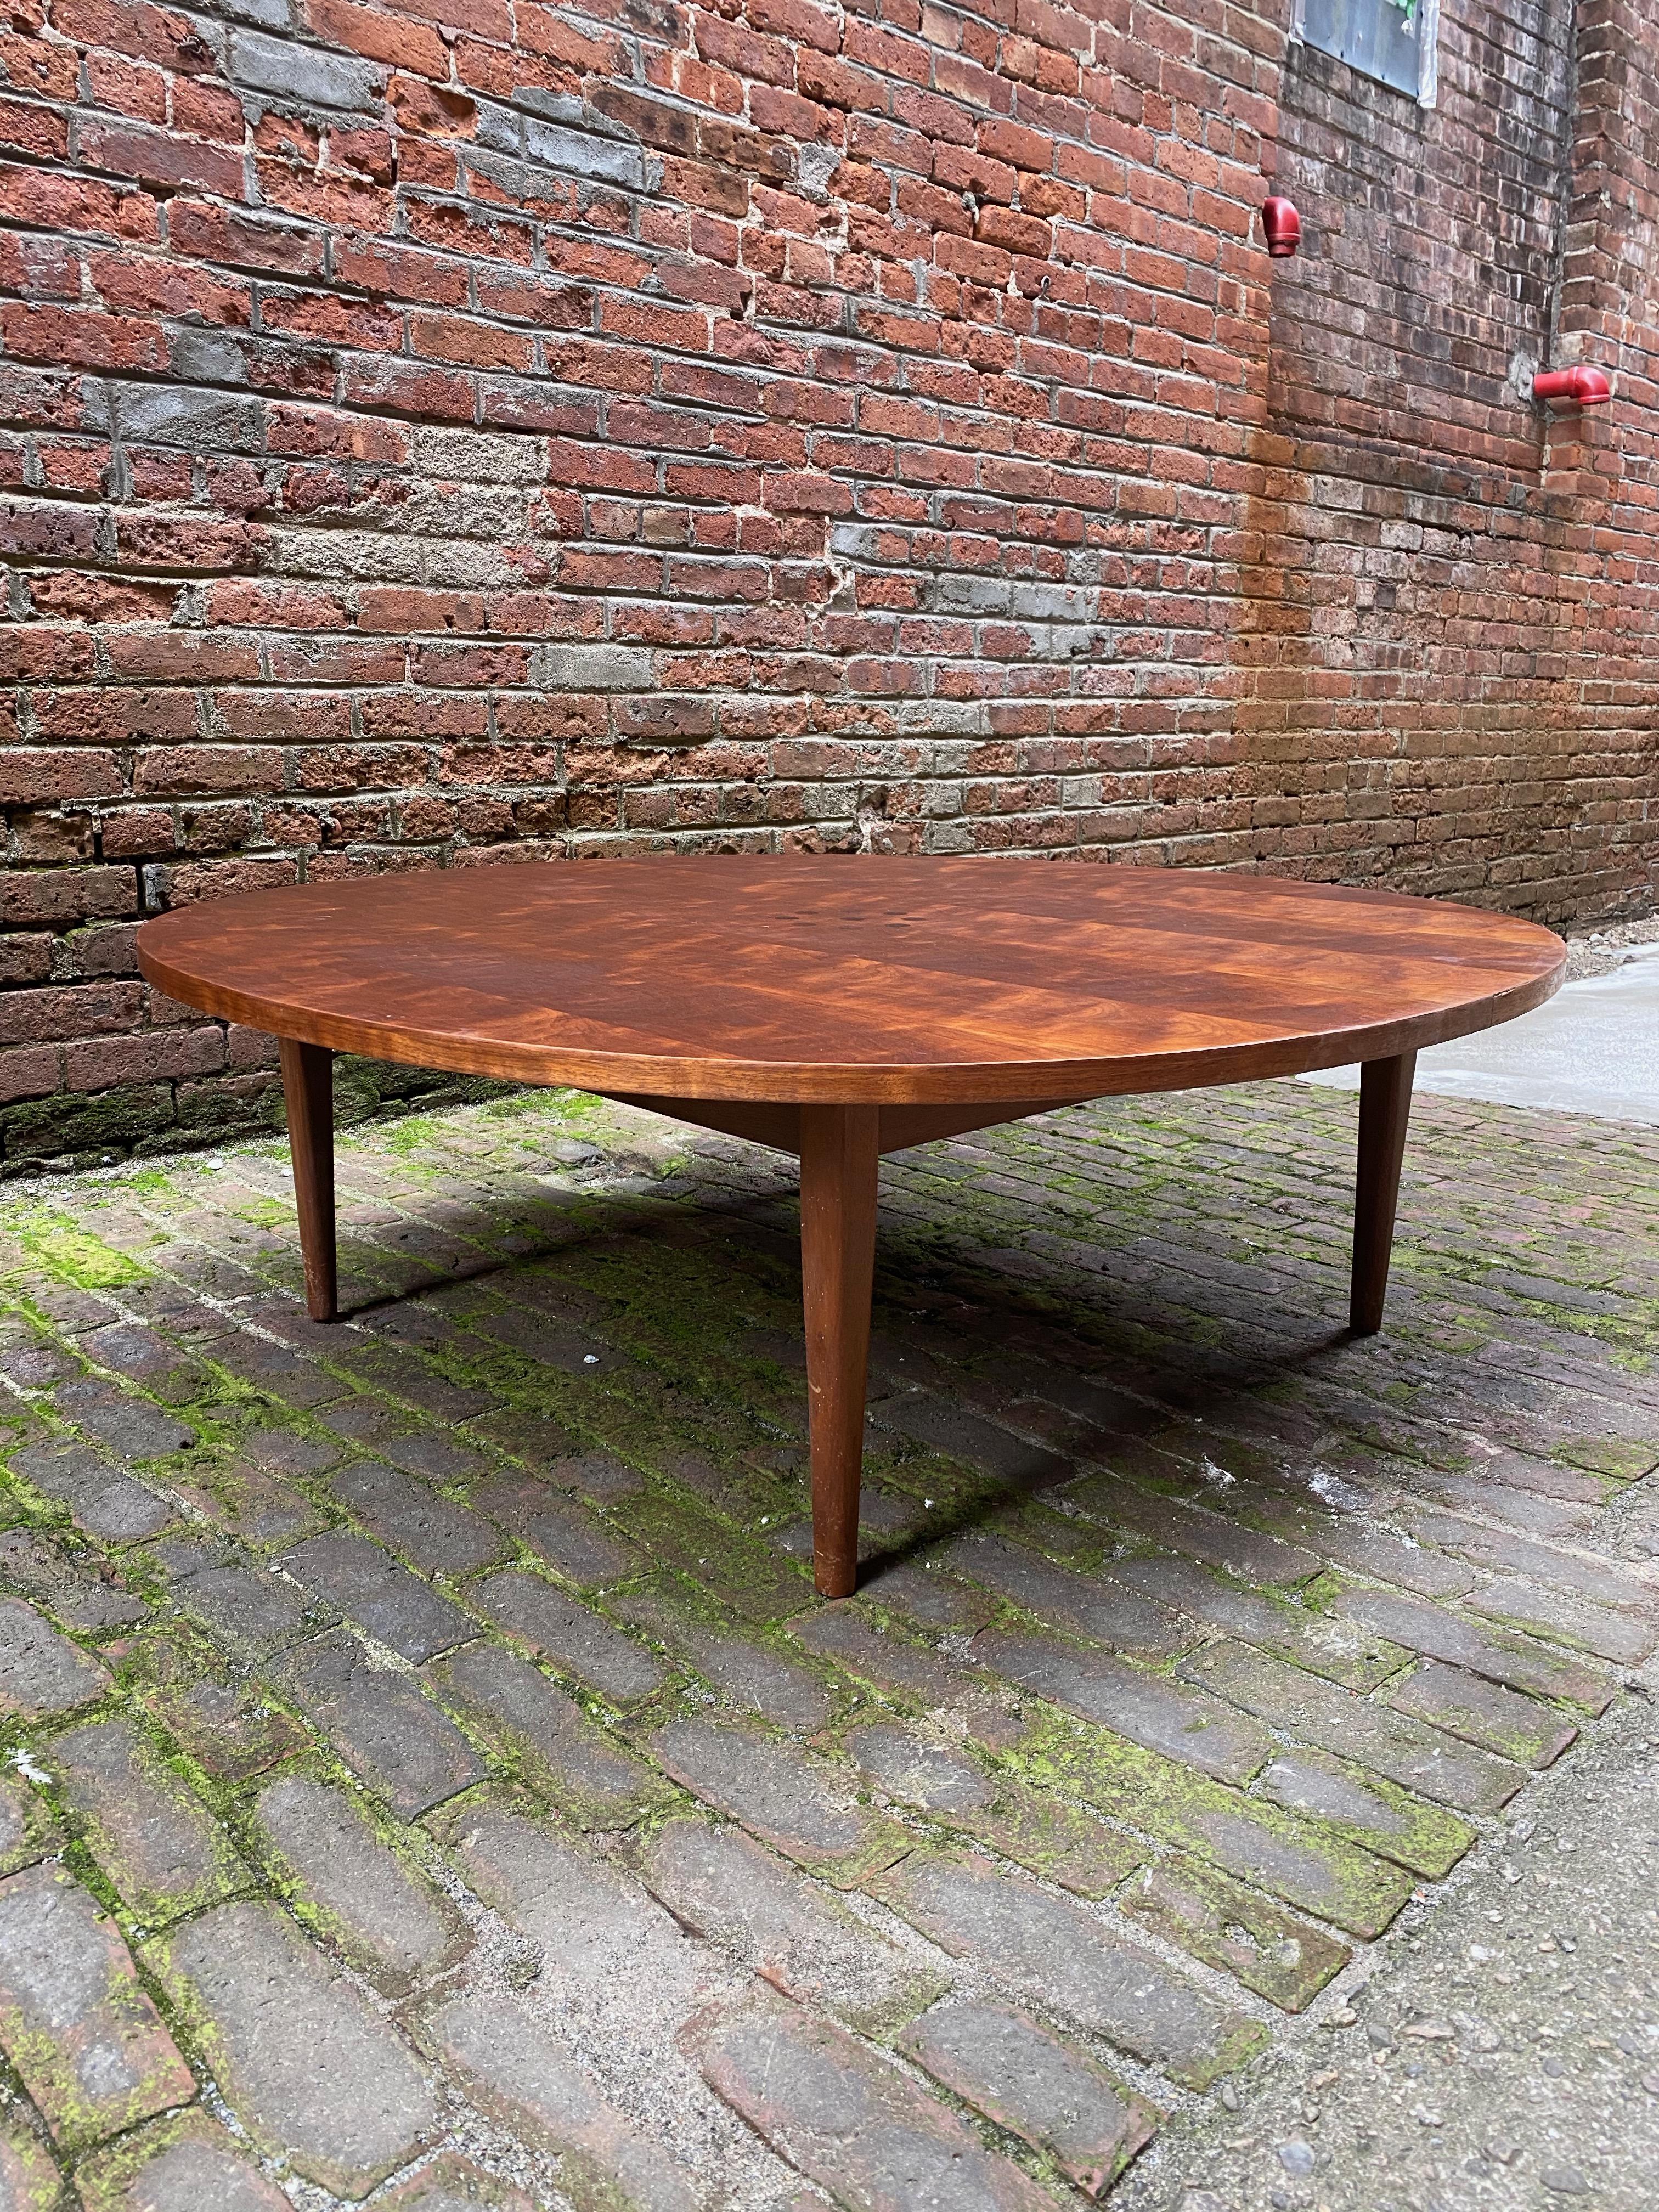 Kipp Stewart designed Drexel declaration walnut with rosewood inlay coffee table. Wonderful figured walnut veneers with round rosewood inlays, circa 1960-1970. Very good condition. Signed on the bottom. Solid walnut legs.

Measures: Approximately